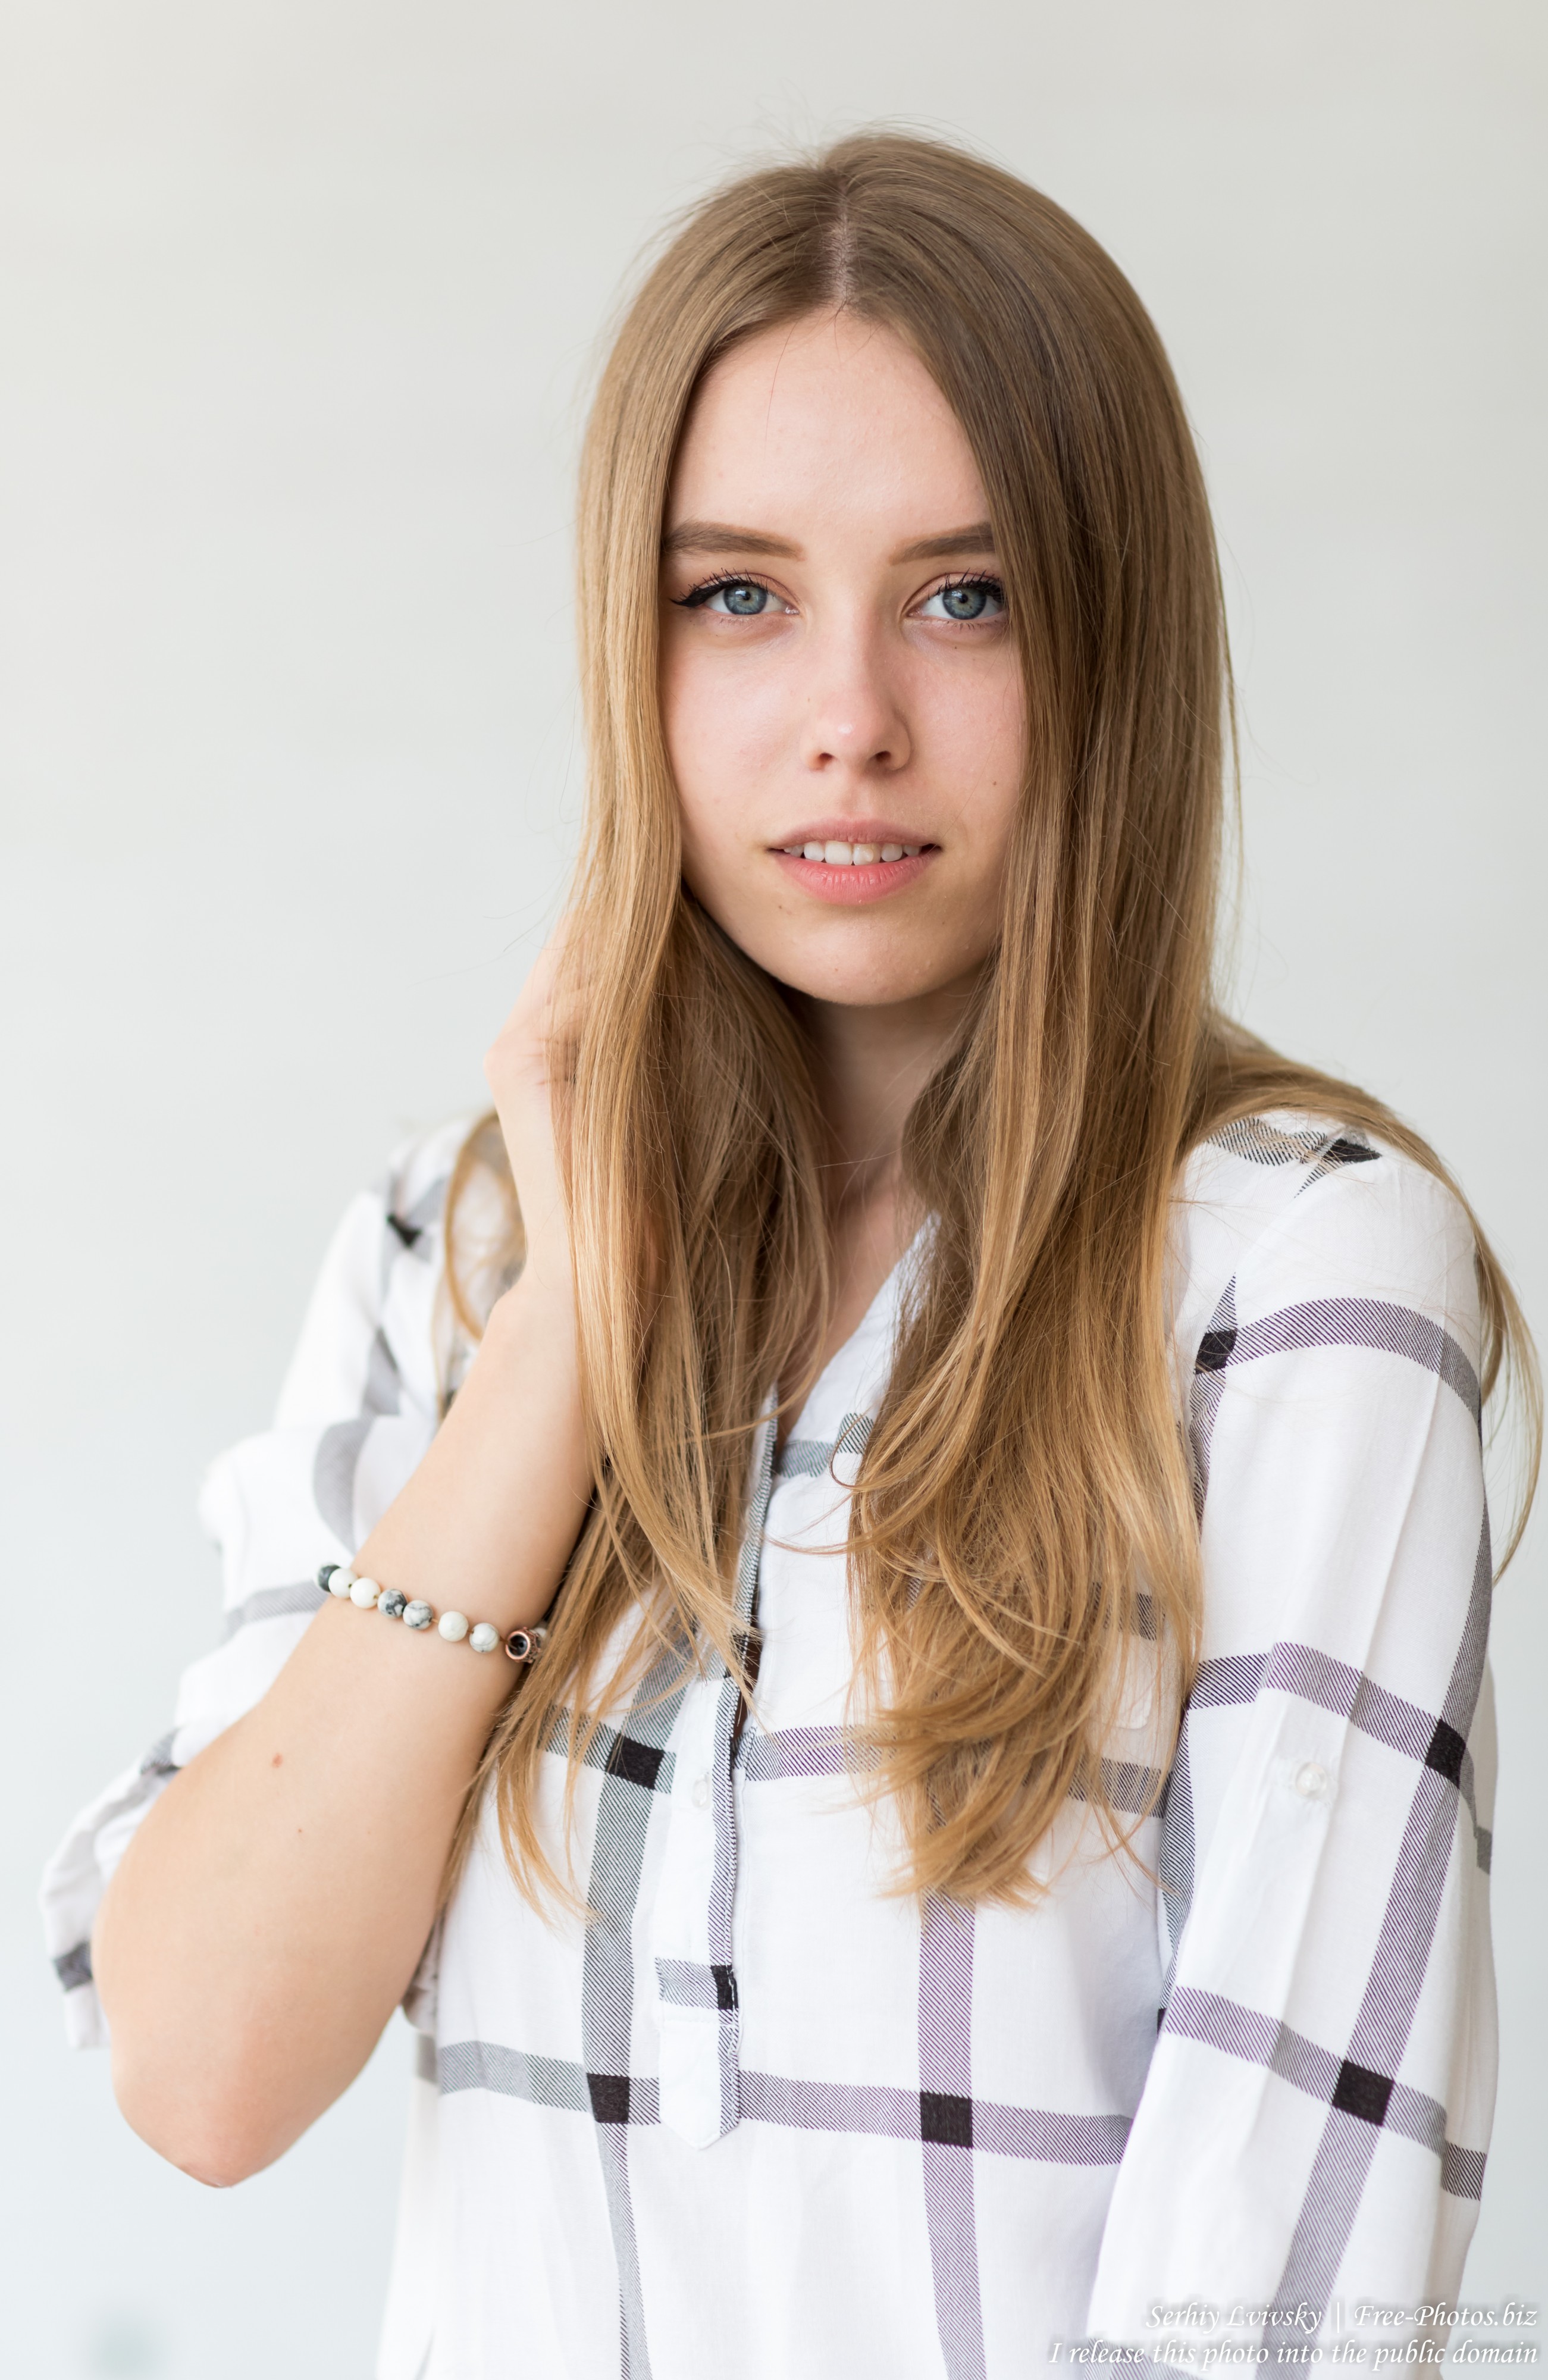 Photo Of Sasha A 19 Year Old Natural Blonde Girl Photographed In July 2019 By Serhiy Lvivsky